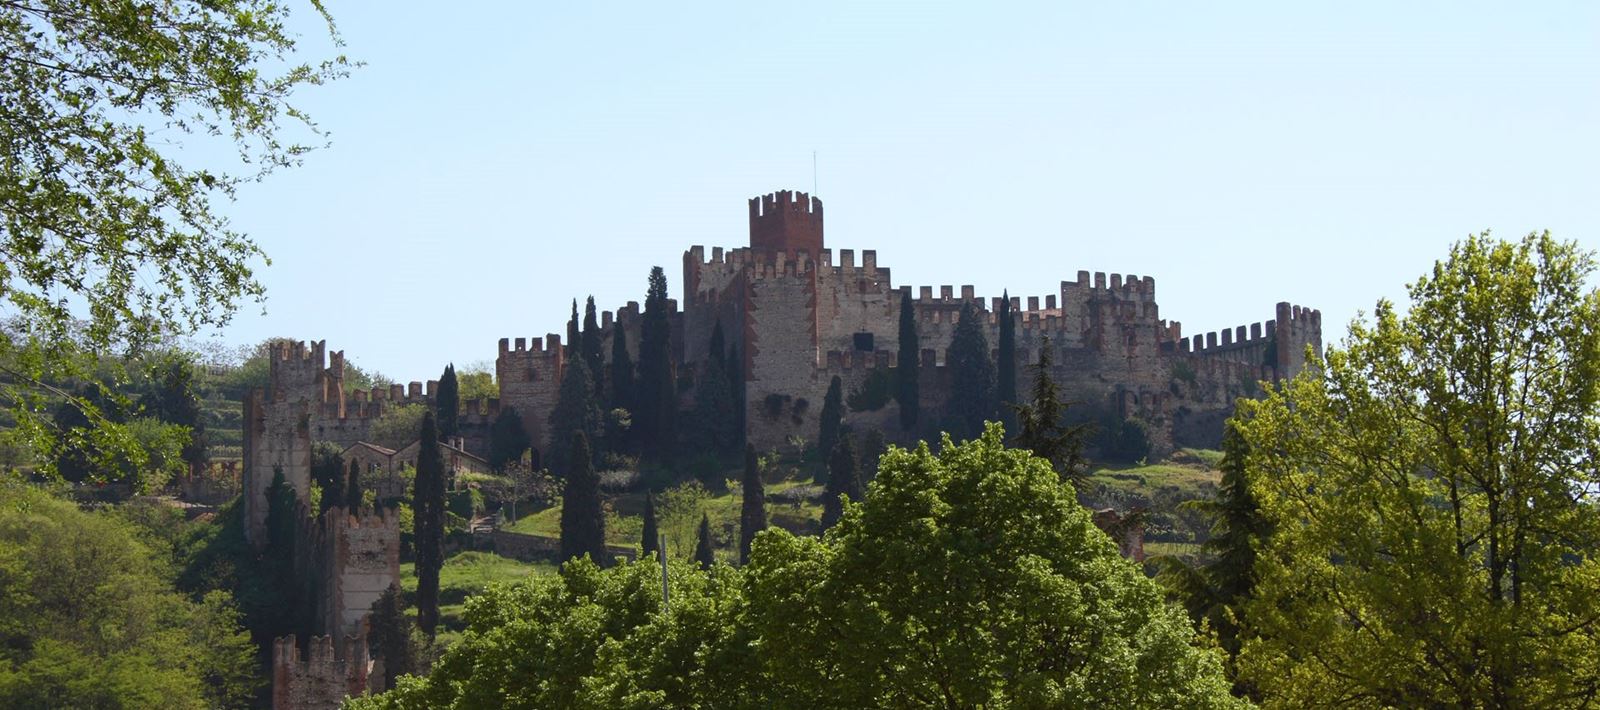 Welcome to the official website of Soave Castle